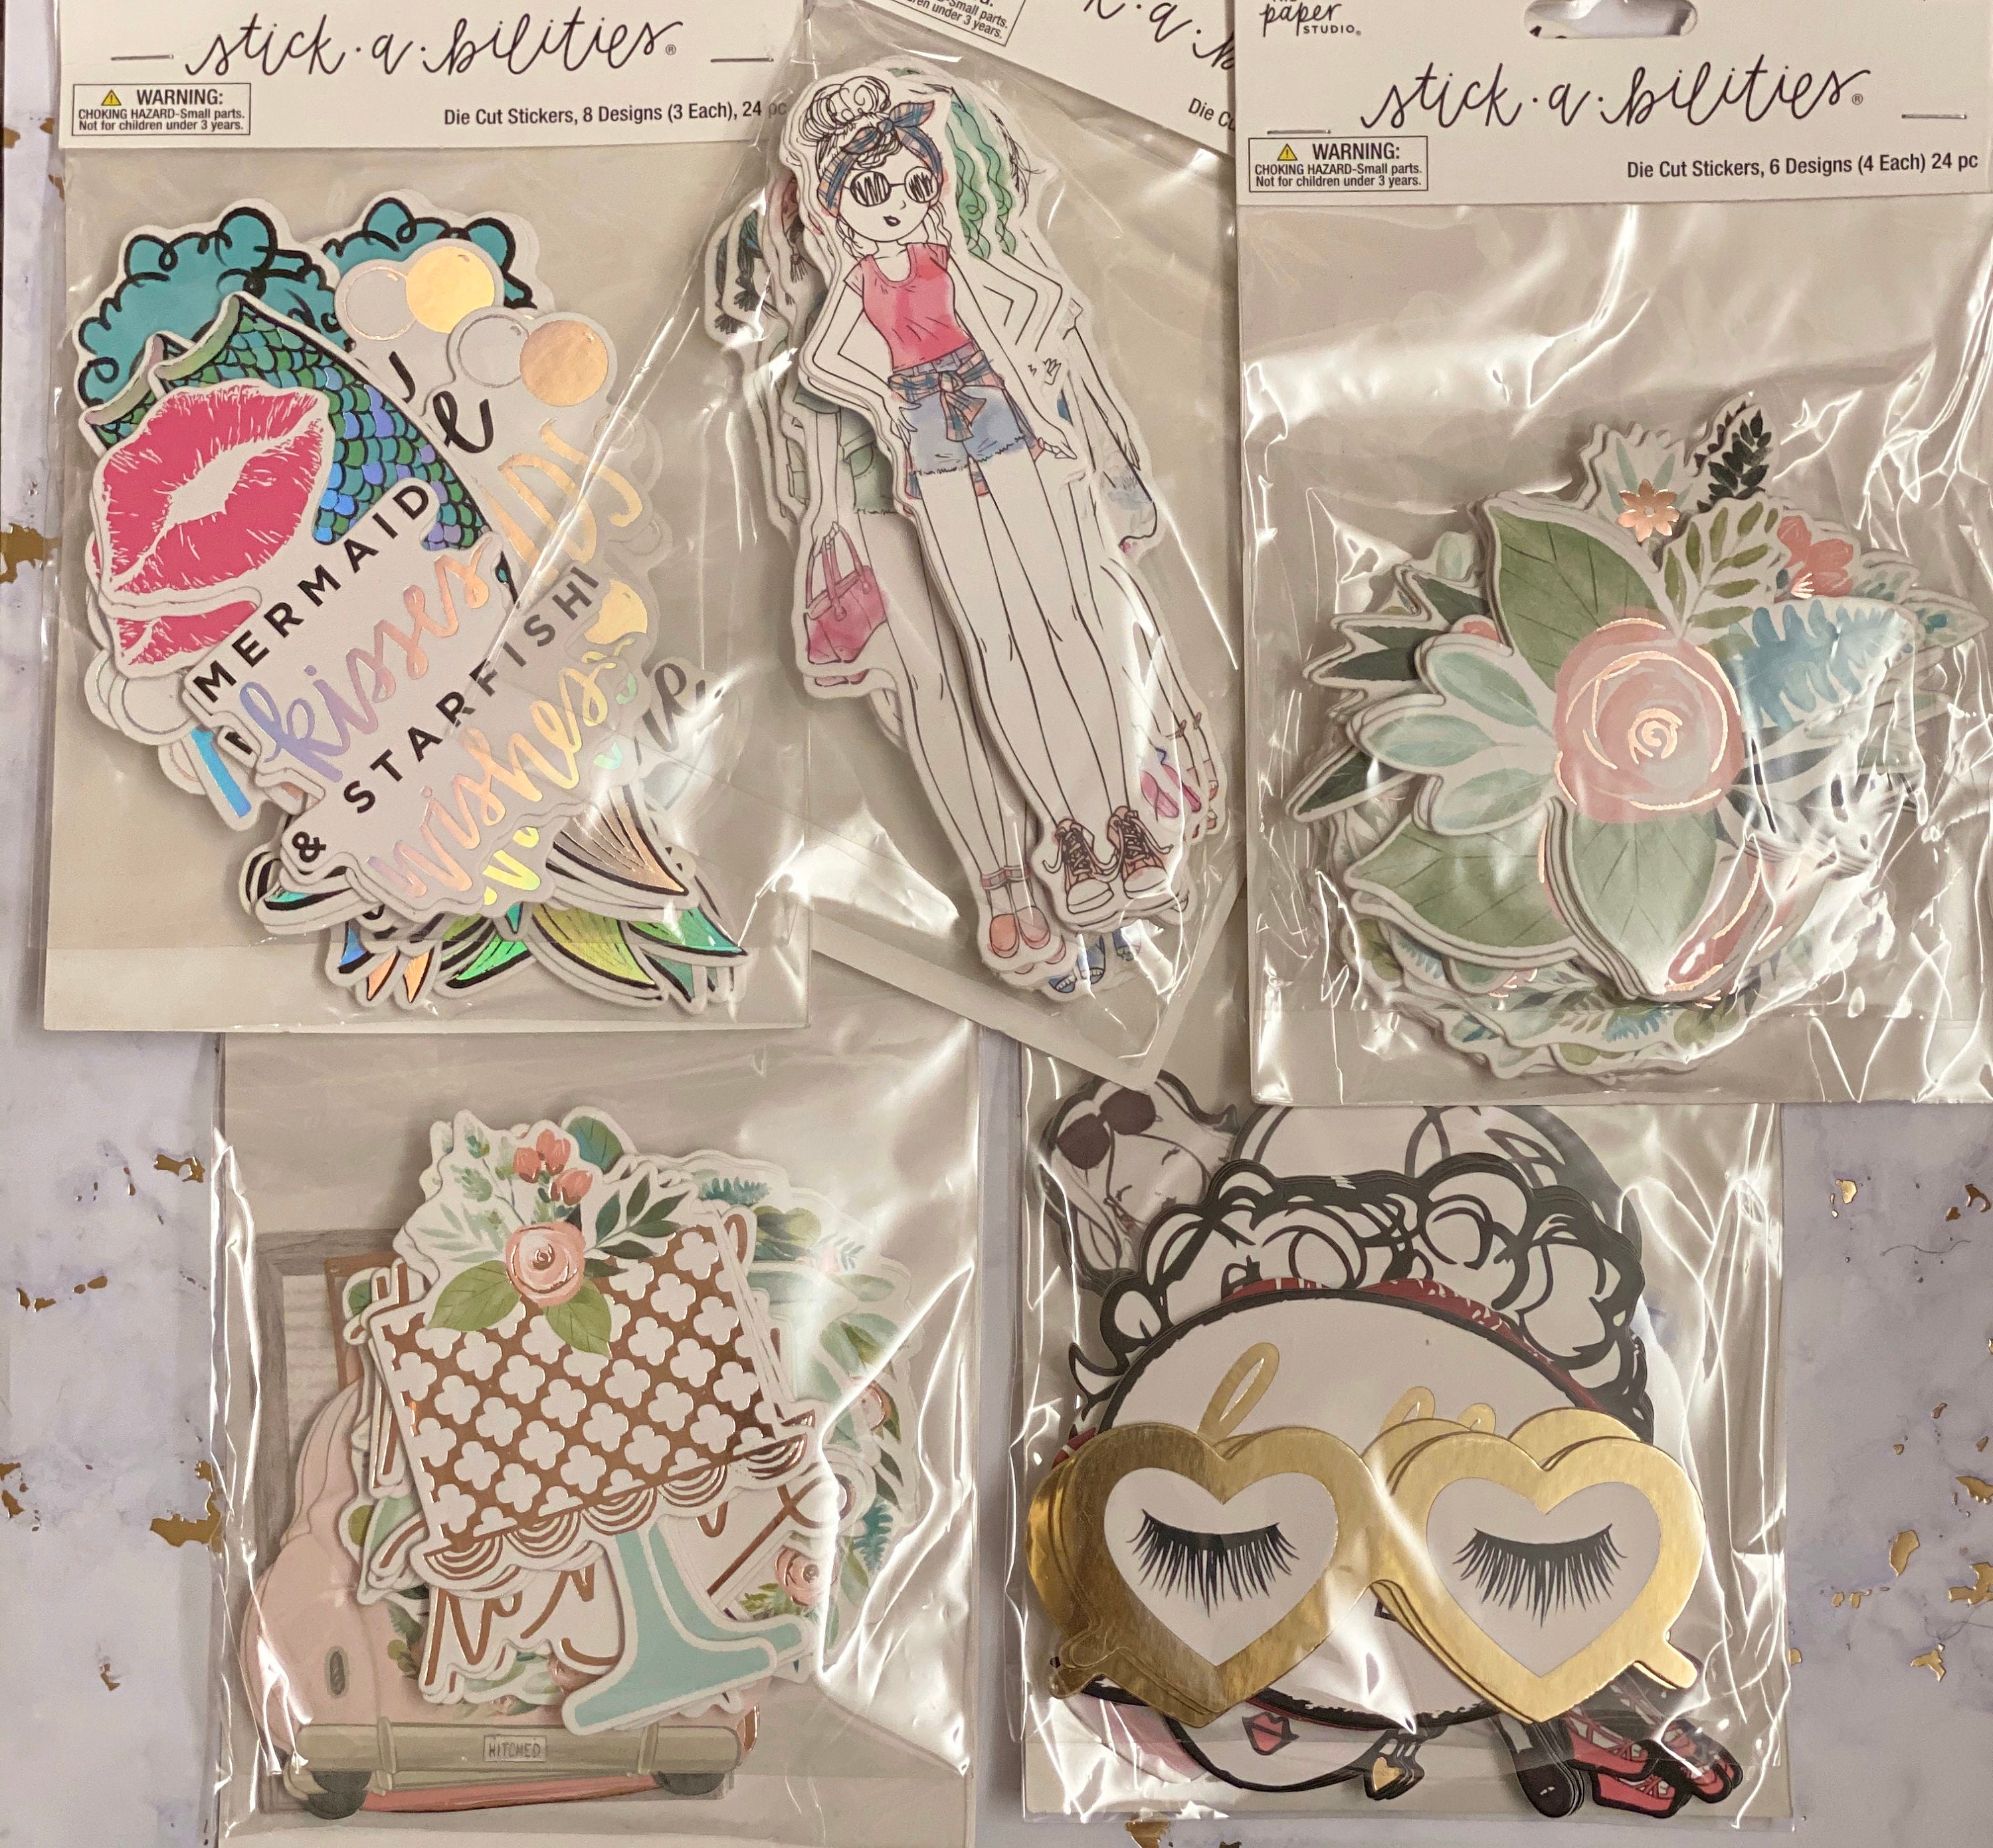 5 Options of Die Cut Stickers From the Paper Studio 24pc/pkg Wedding/pastel  Flower/hello Lovely/watercolor Girl/mermaid 